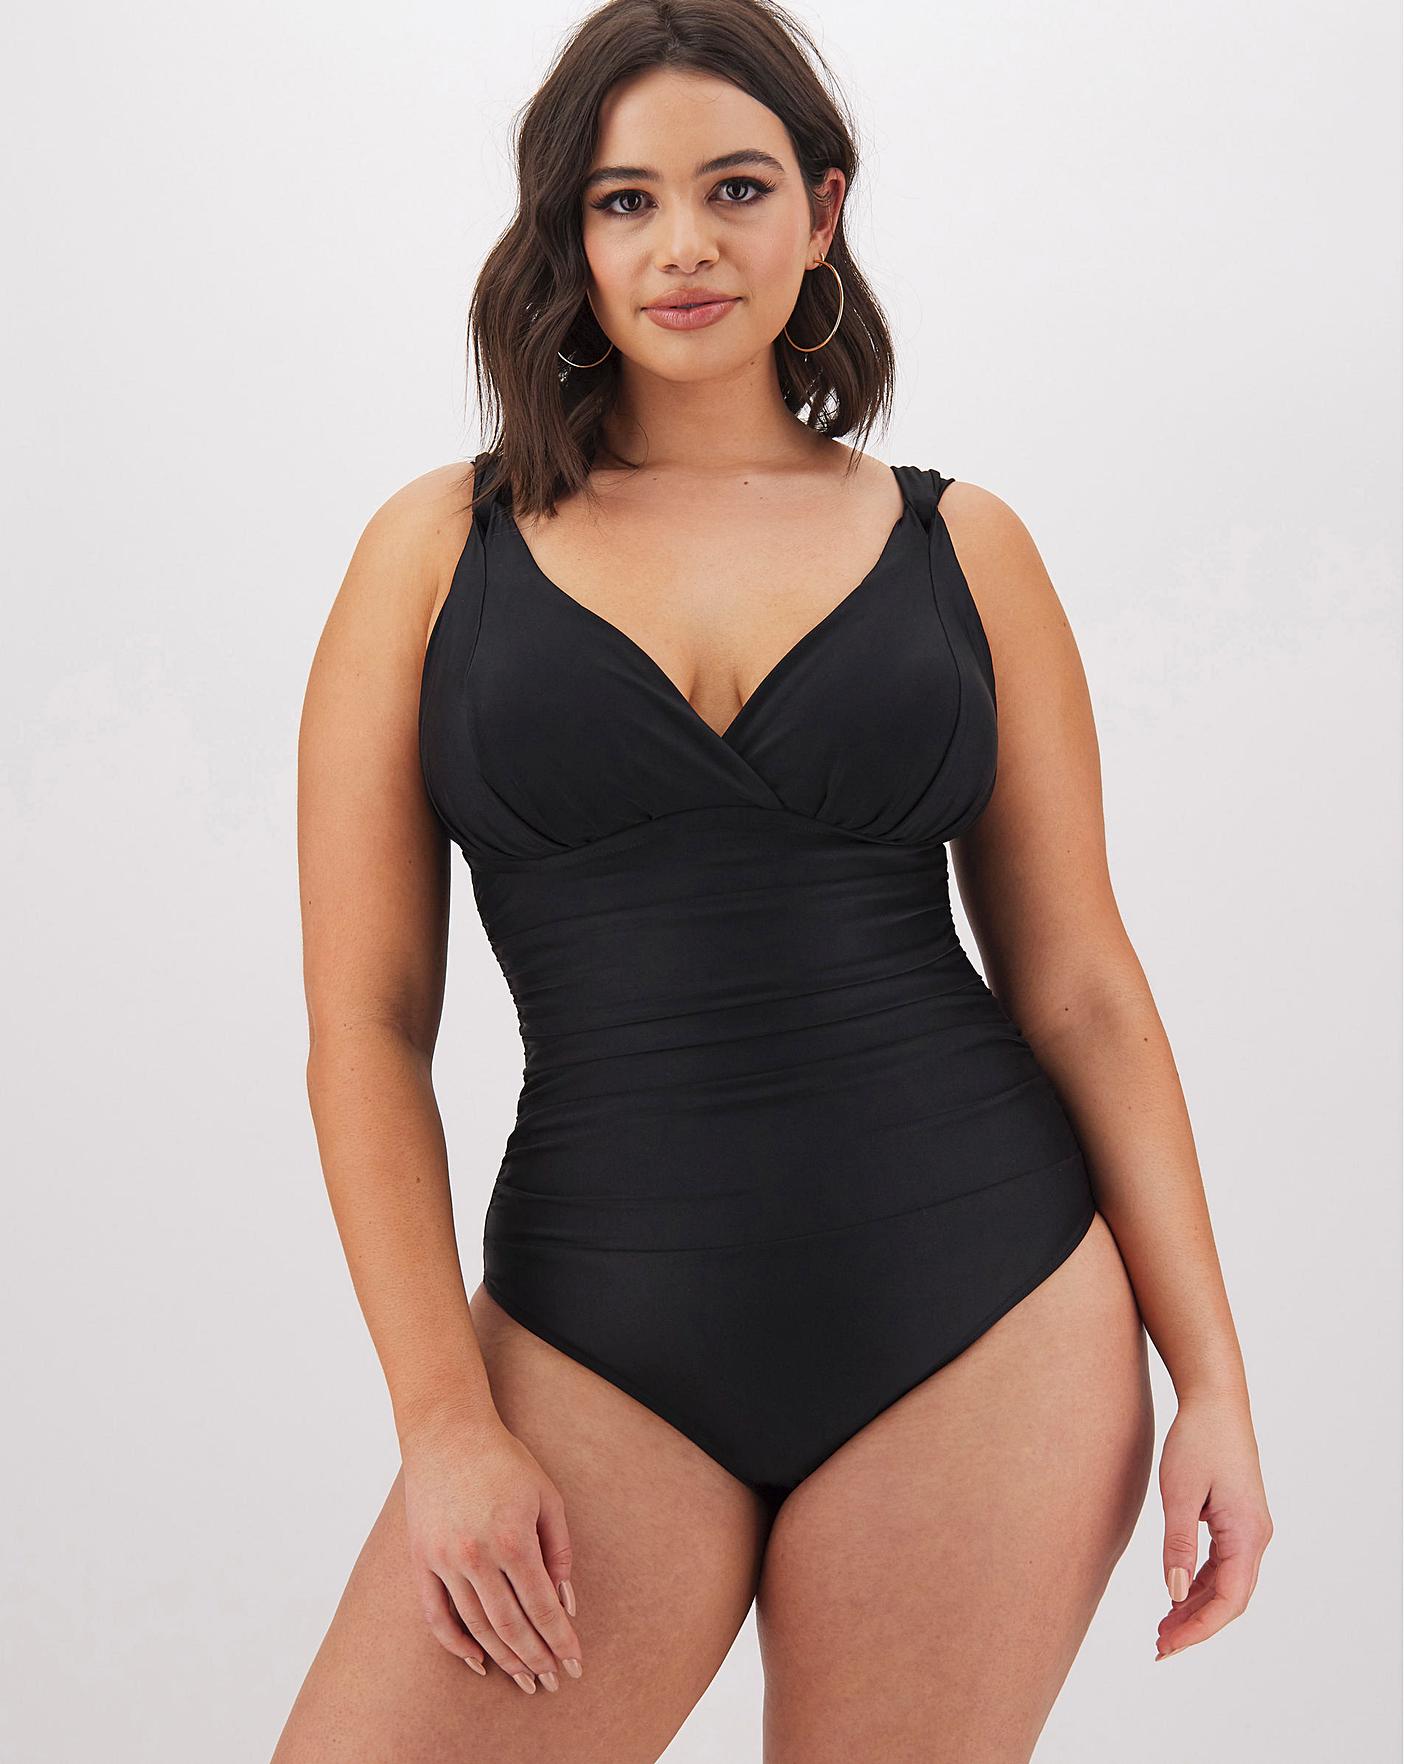 MAGISCULPT Black Lose Up To An Inch Shaping Swimsuit from Swimsuit